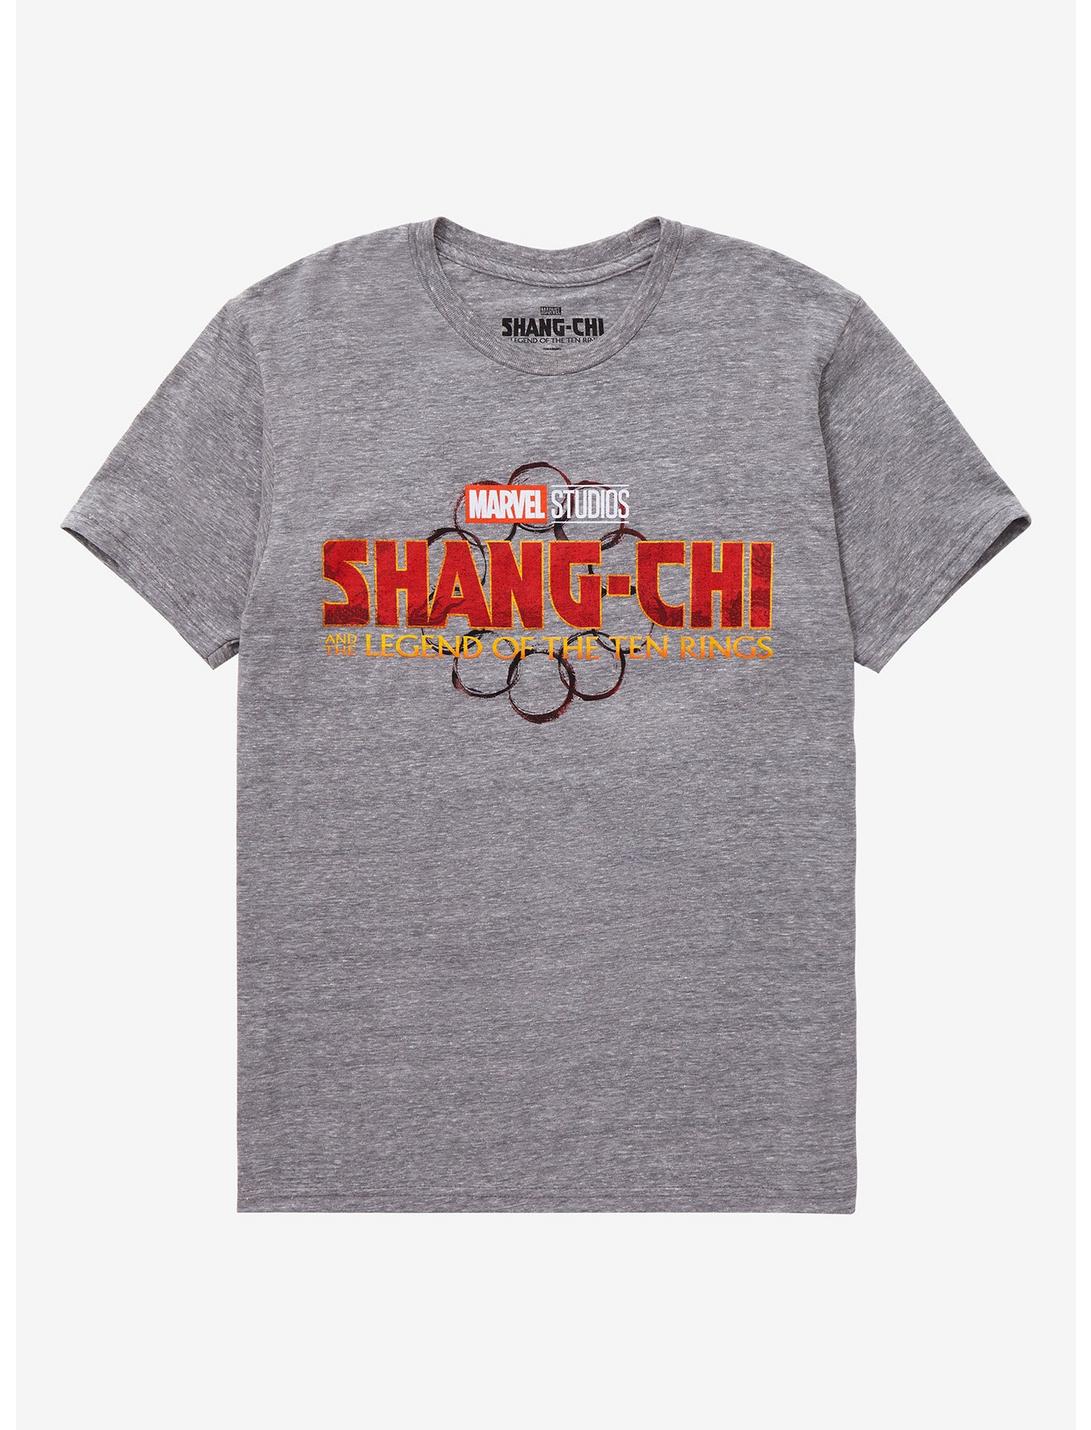 Marvel Shang-Chi And The Legend Of The Ten Rings T-Shirt, BLACK, hi-res